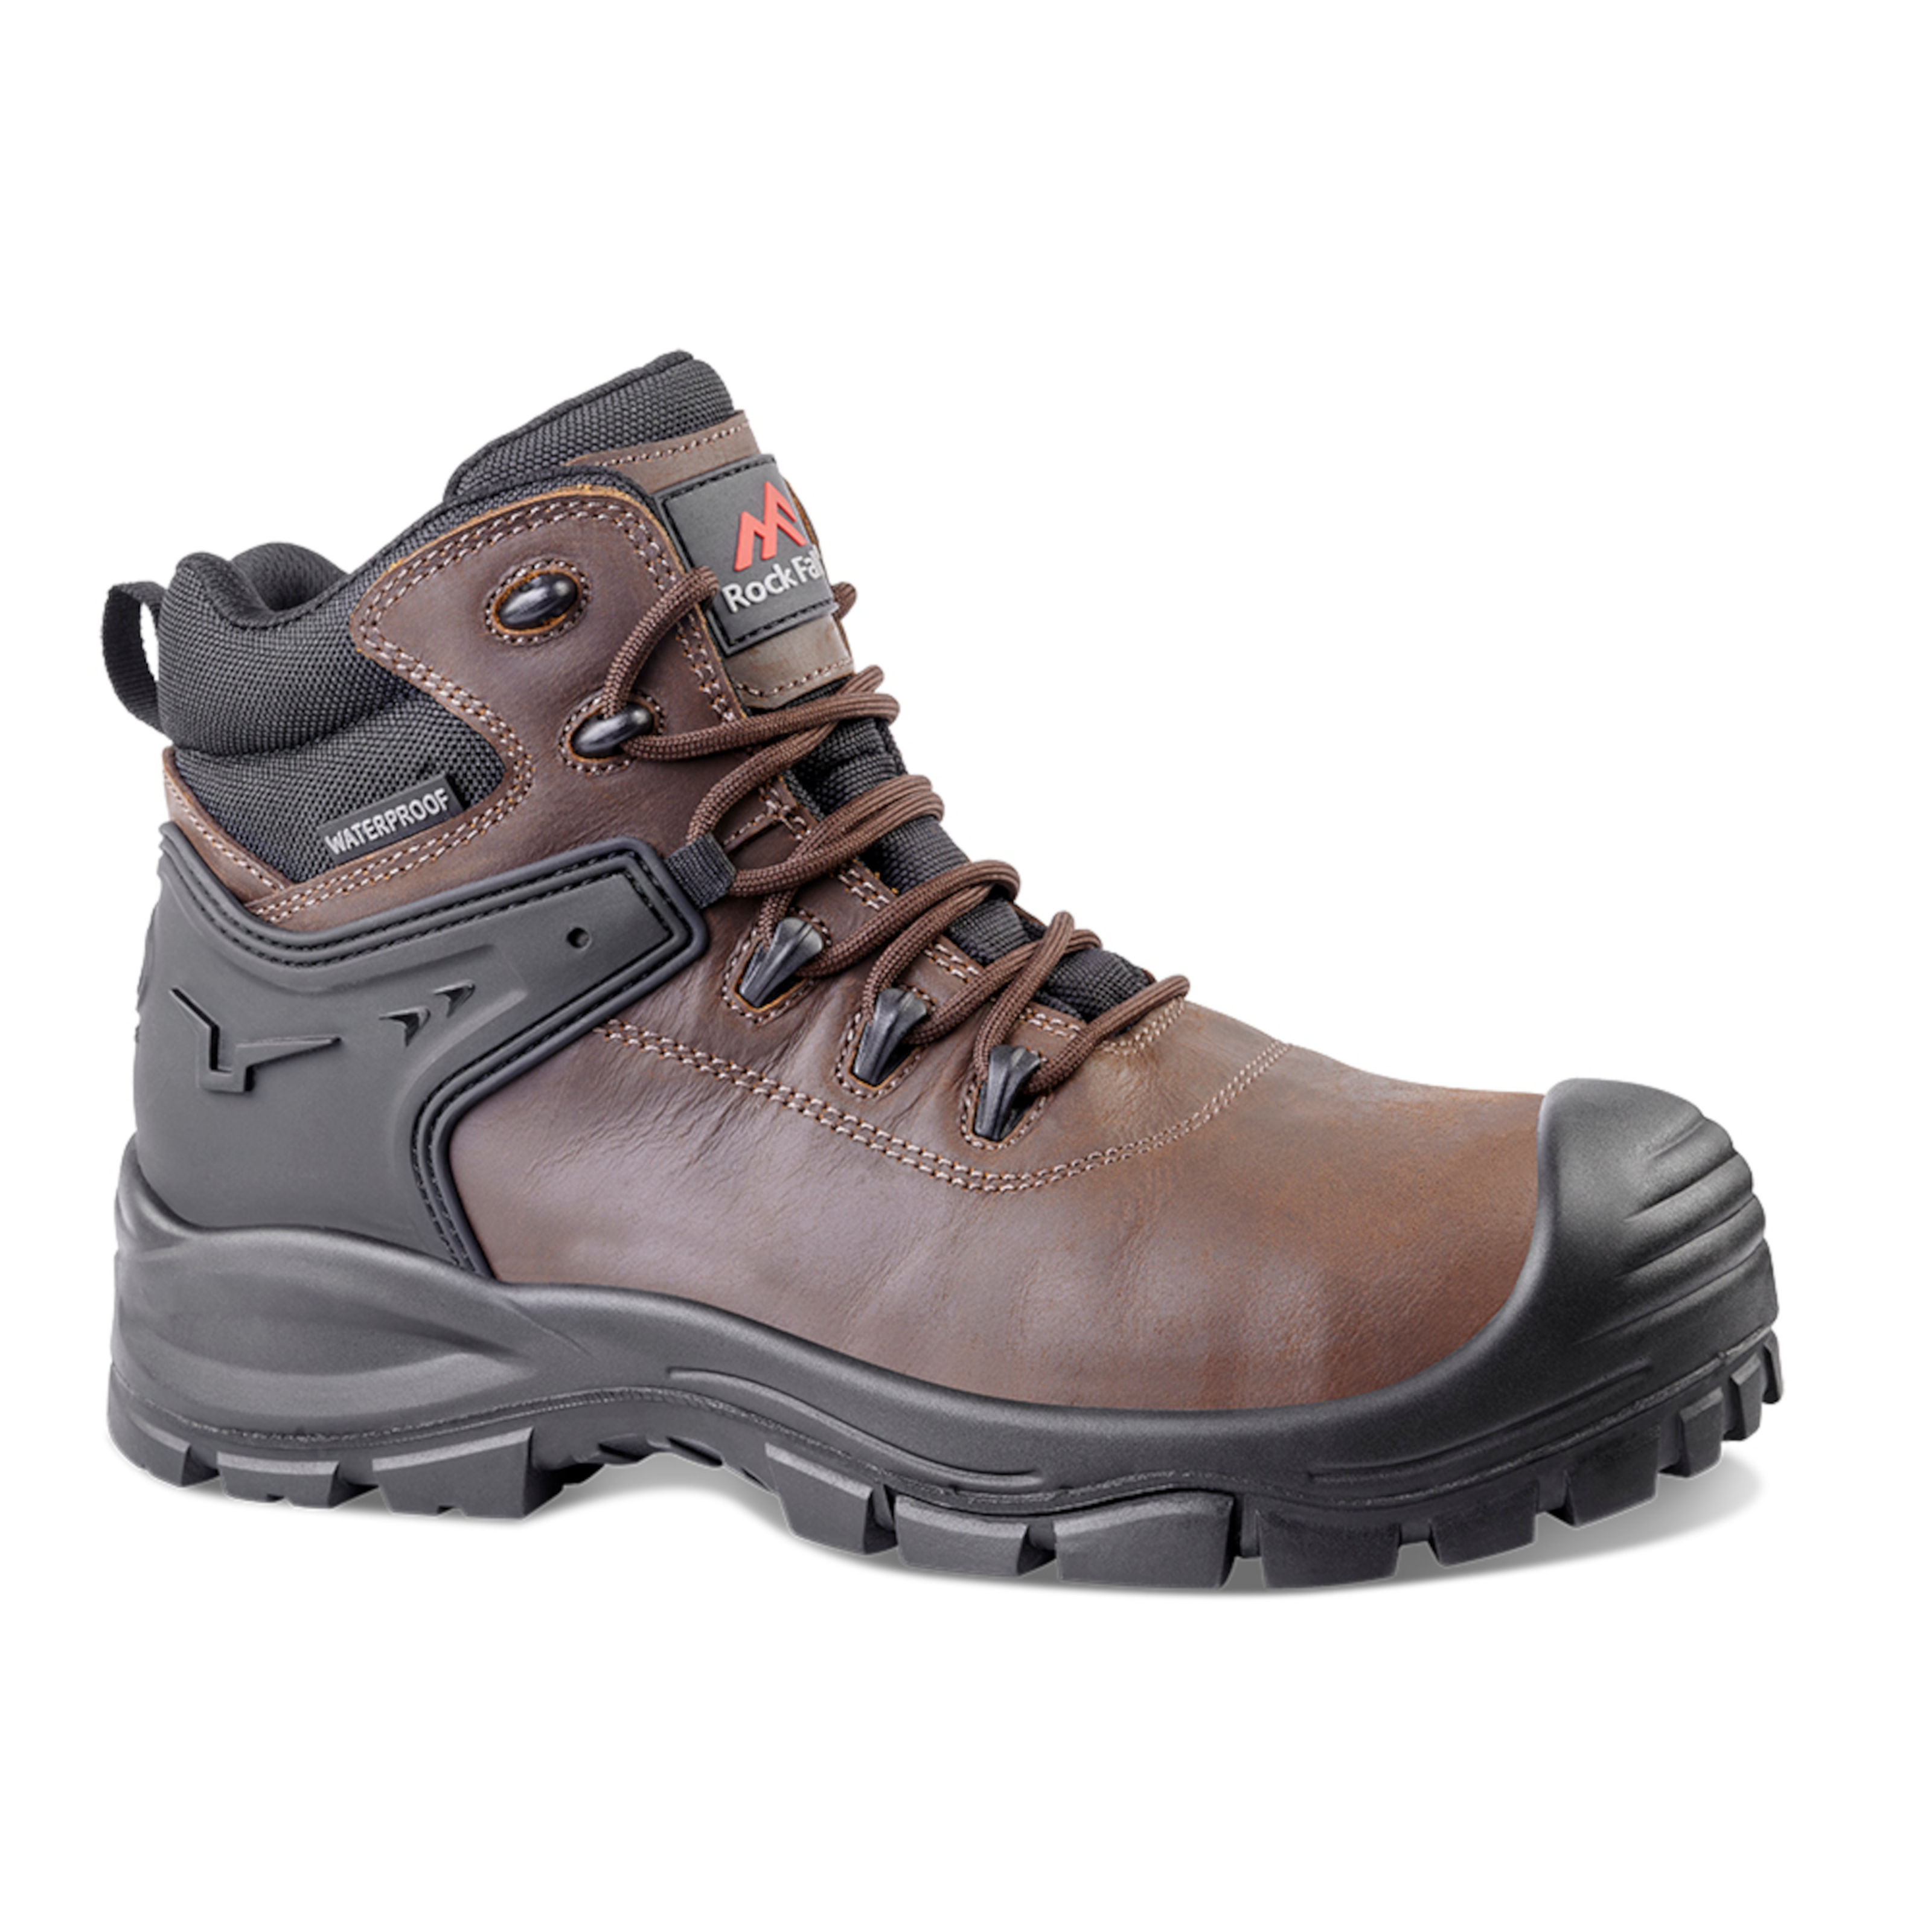 Rock Fall Rhodium RF250 Chemical Resistant Lorica Composite Toe Cap Safety Boots 